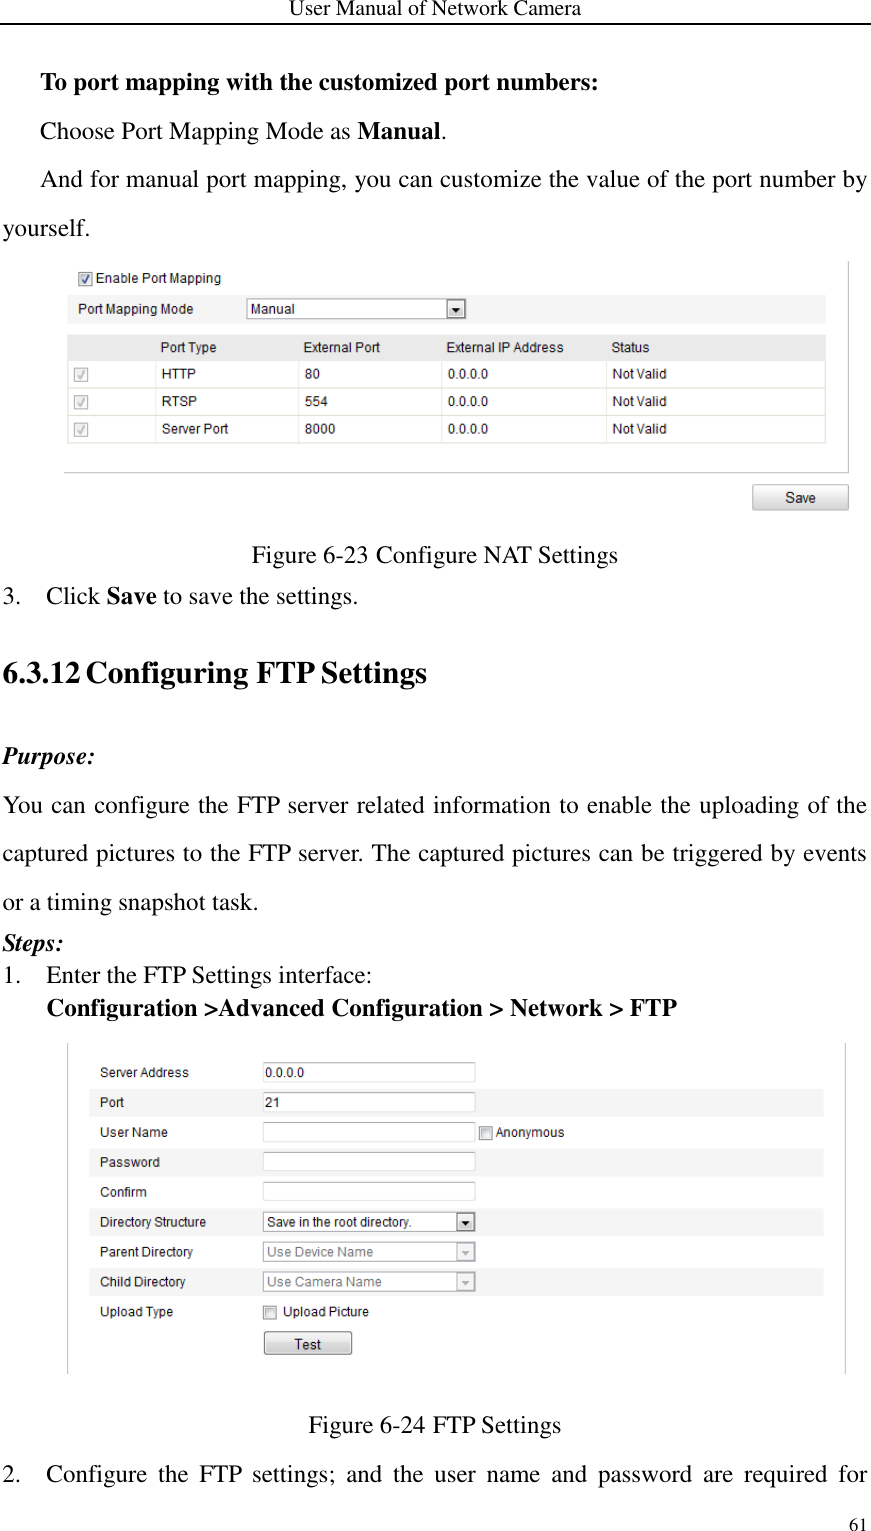 User Manual of Network Camera 61  To port mapping with the customized port numbers: Choose Port Mapping Mode as Manual.    And for manual port mapping, you can customize the value of the port number by yourself.  Figure 6-23 Configure NAT Settings 3. Click Save to save the settings. 6.3.12 Configuring FTP Settings Purpose: You can configure the FTP server related information to enable the uploading of the captured pictures to the FTP server. The captured pictures can be triggered by events or a timing snapshot task. Steps: 1. Enter the FTP Settings interface: Configuration &gt;Advanced Configuration &gt; Network &gt; FTP    Figure 6-24 FTP Settings 2. Configure  the  FTP  settings;  and  the  user  name  and  password  are  required  for 